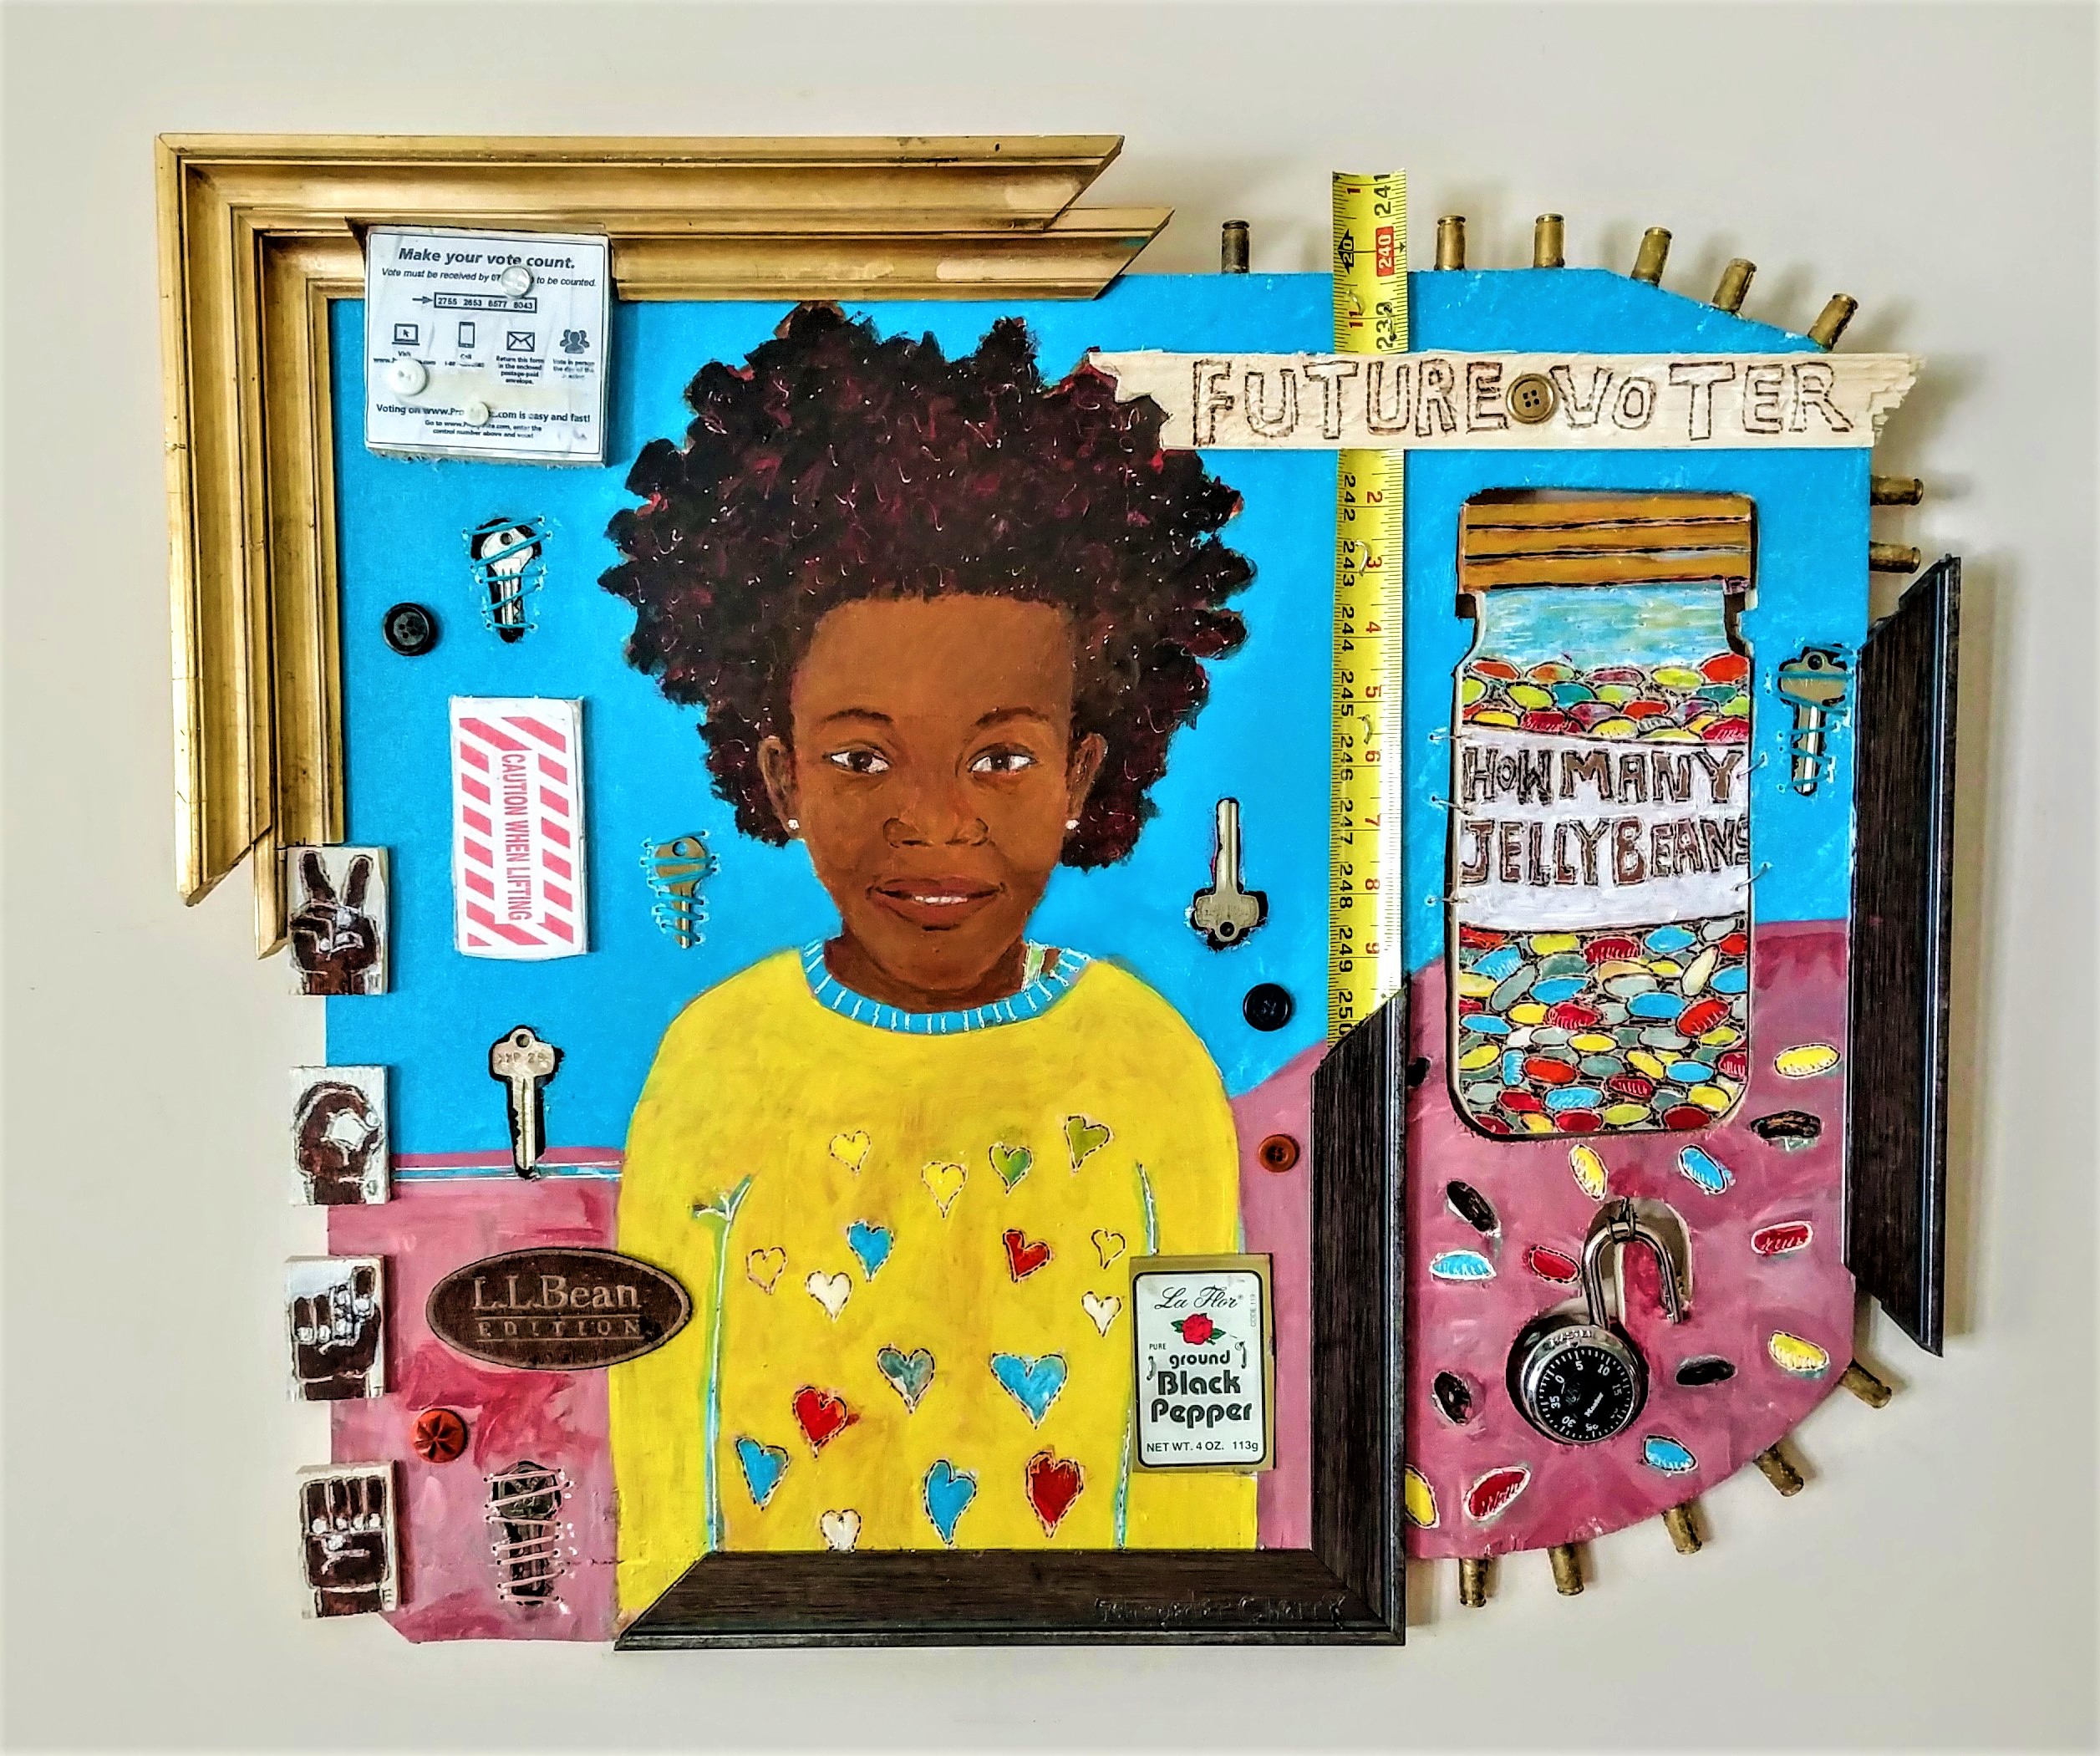   Acrylic, metal, thread with objects on wood  23 x 27 inches;  2021